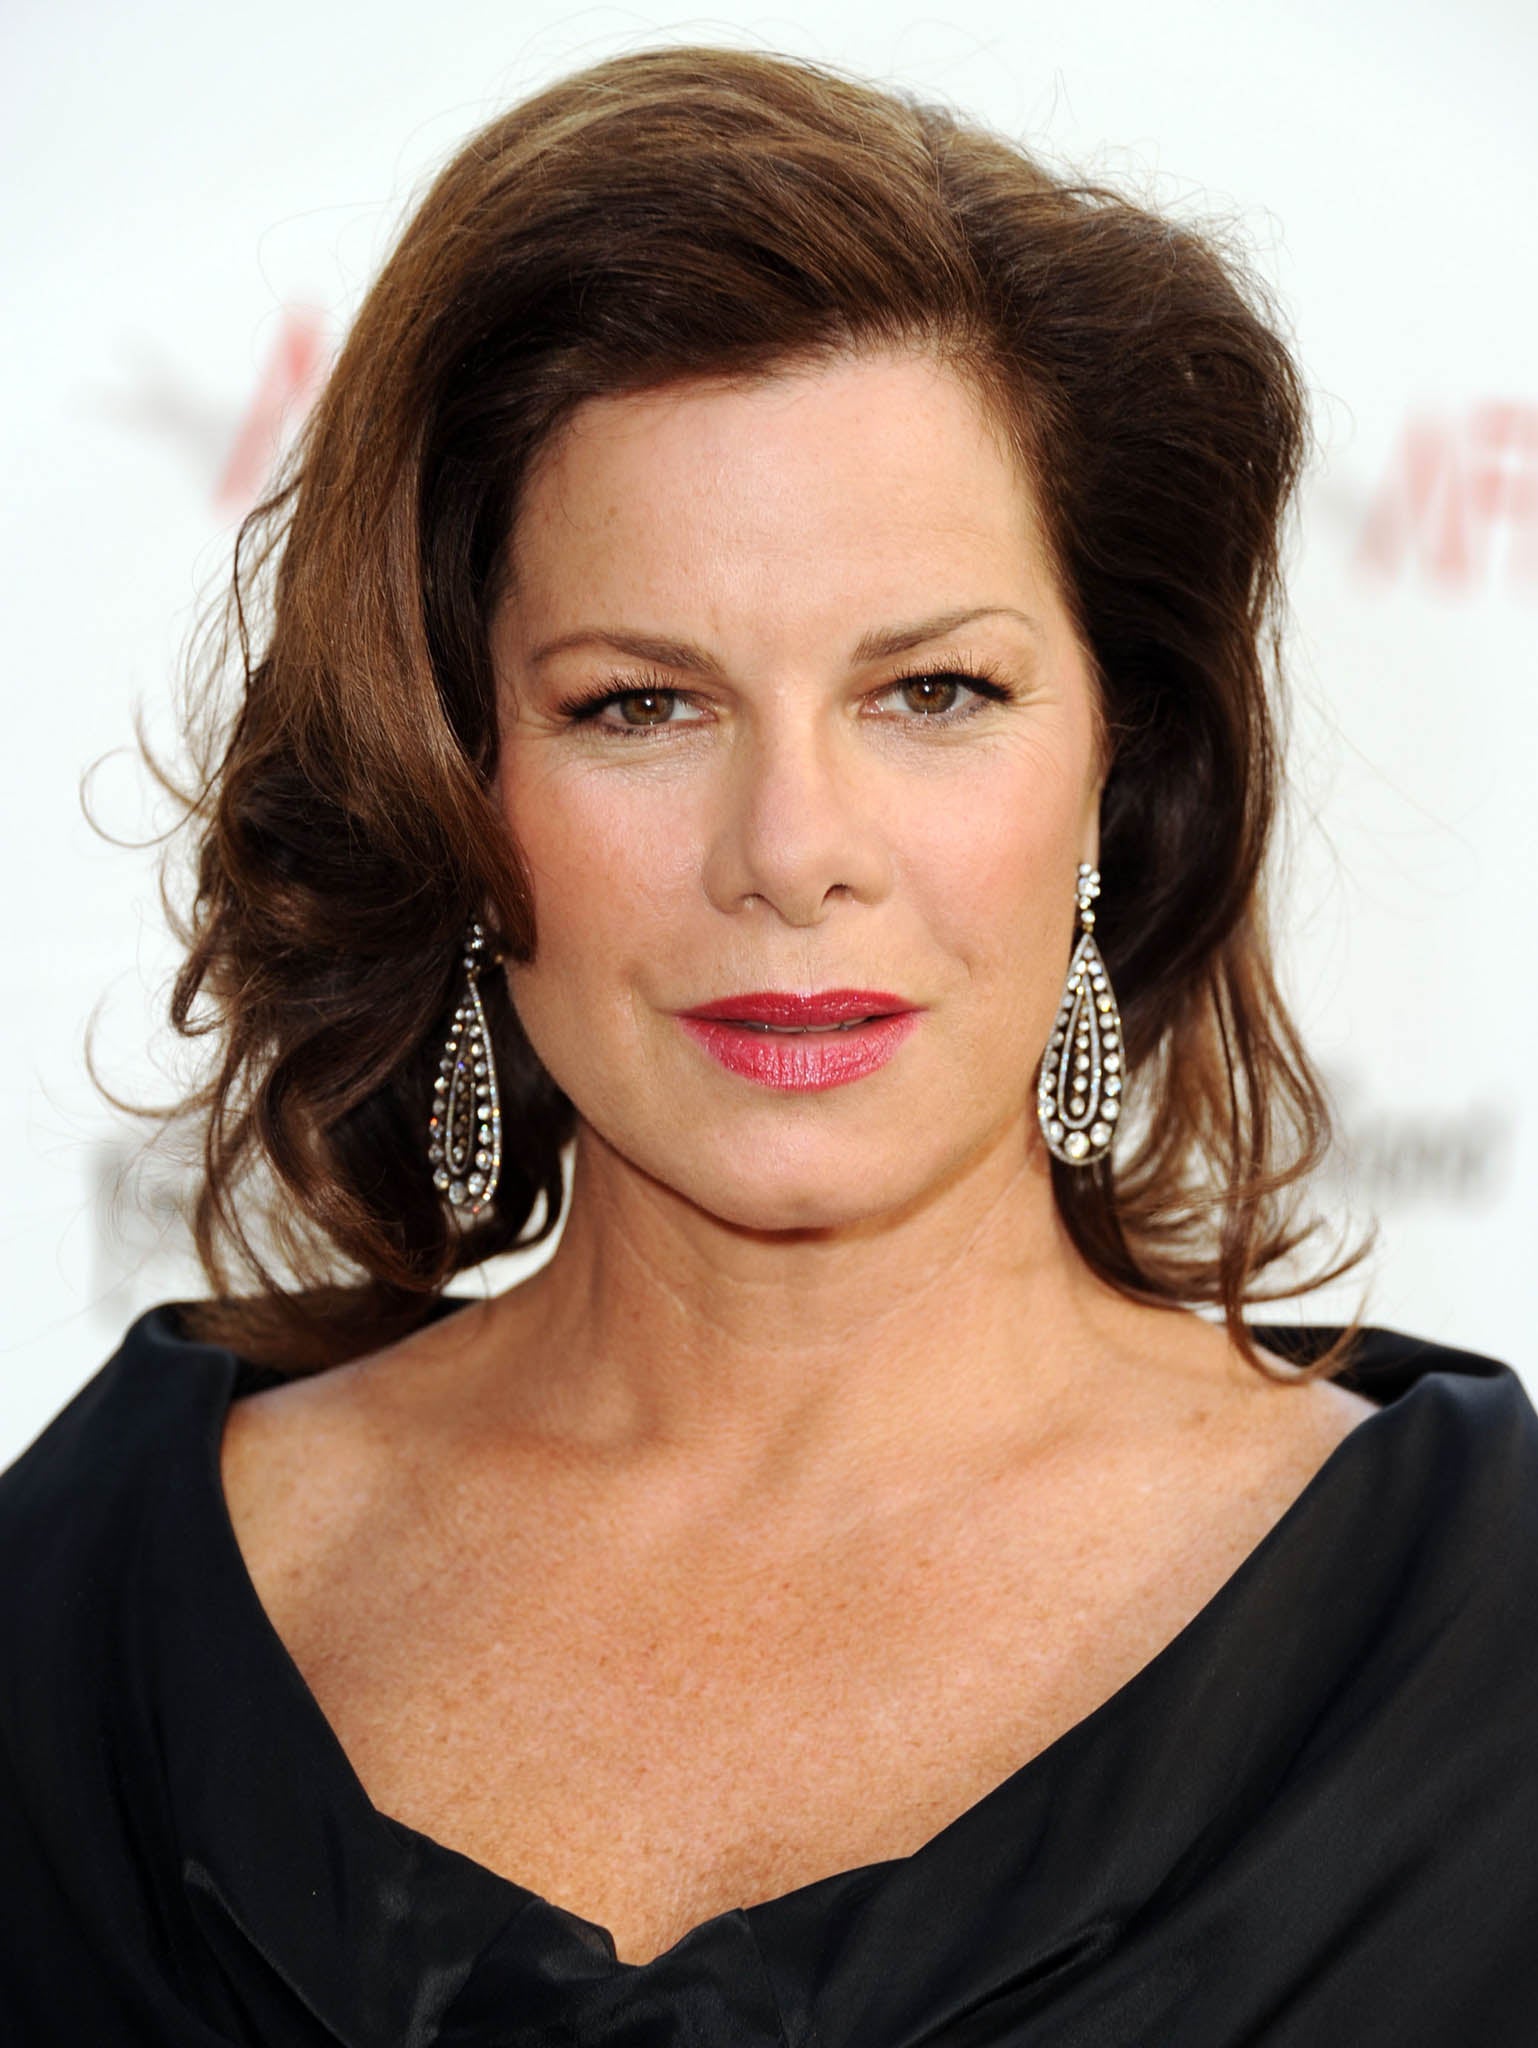 Marcia Gay Harden has joined the Fifty Shades of Grey cast